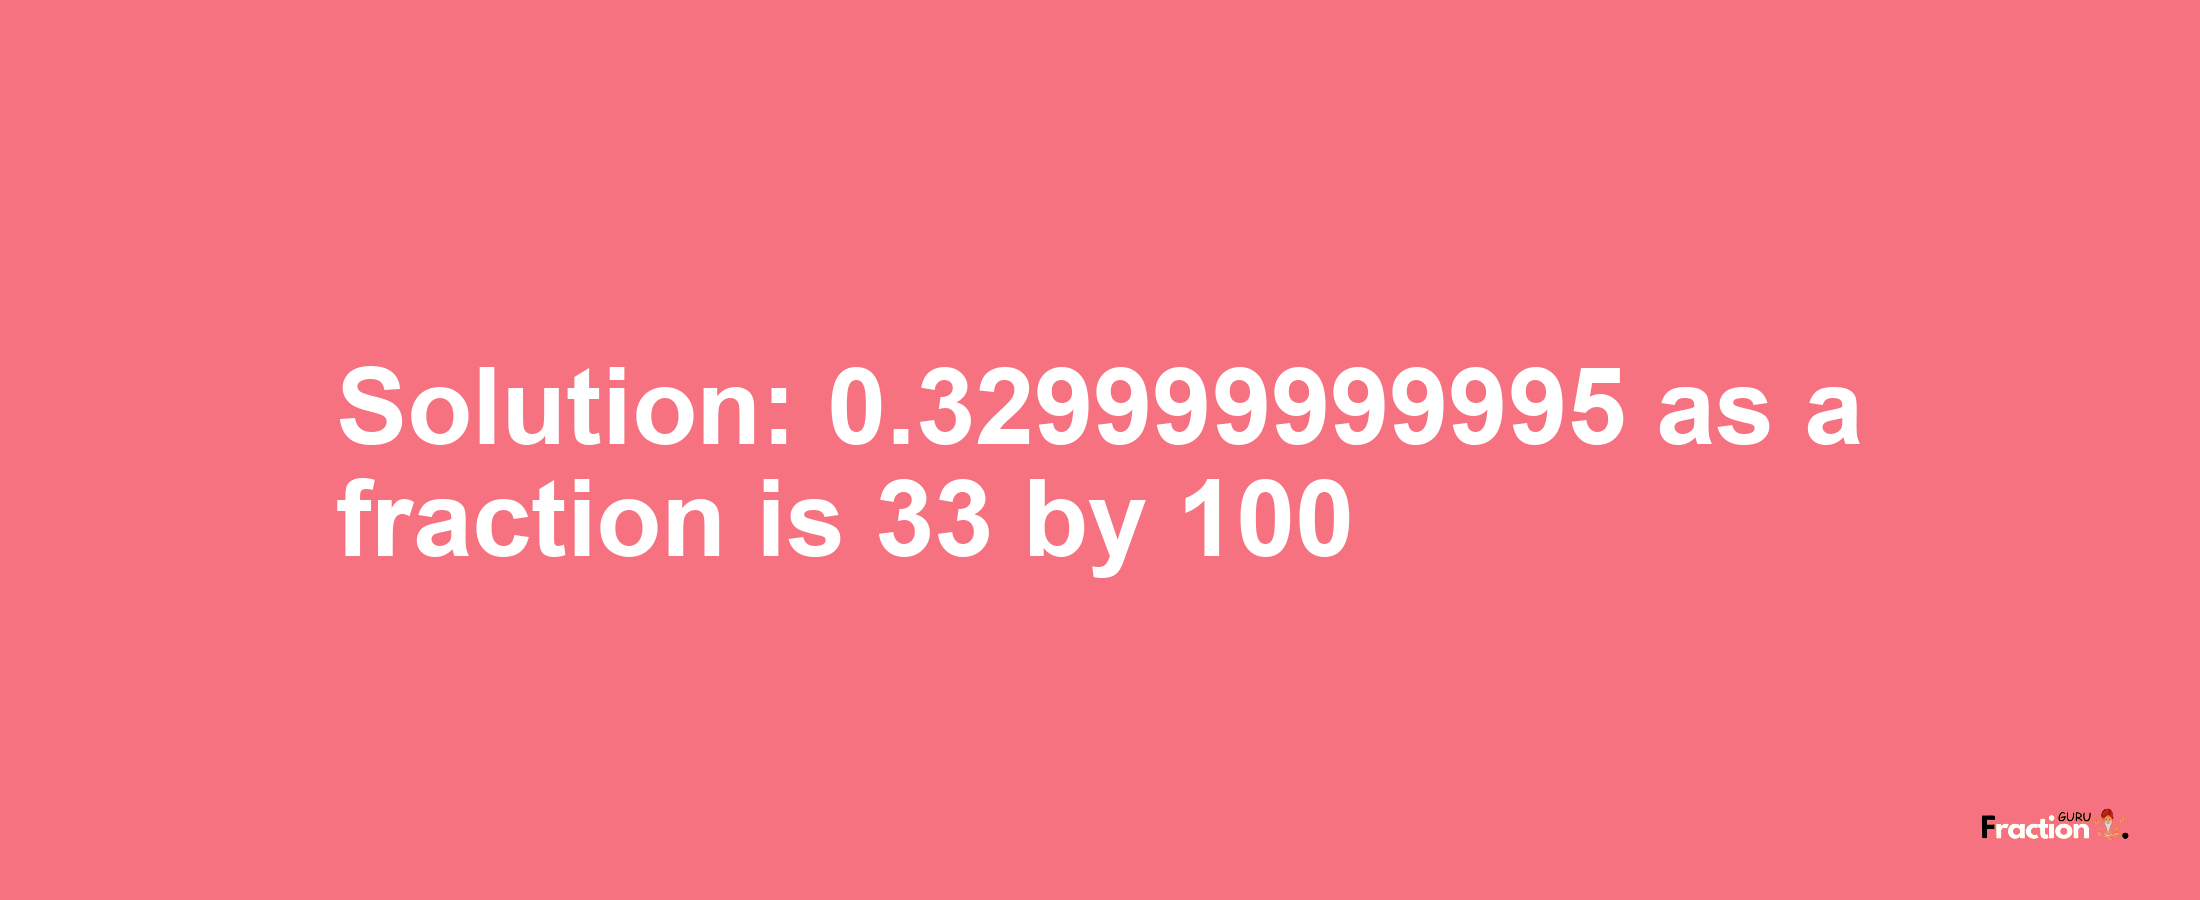 Solution:0.329999999995 as a fraction is 33/100